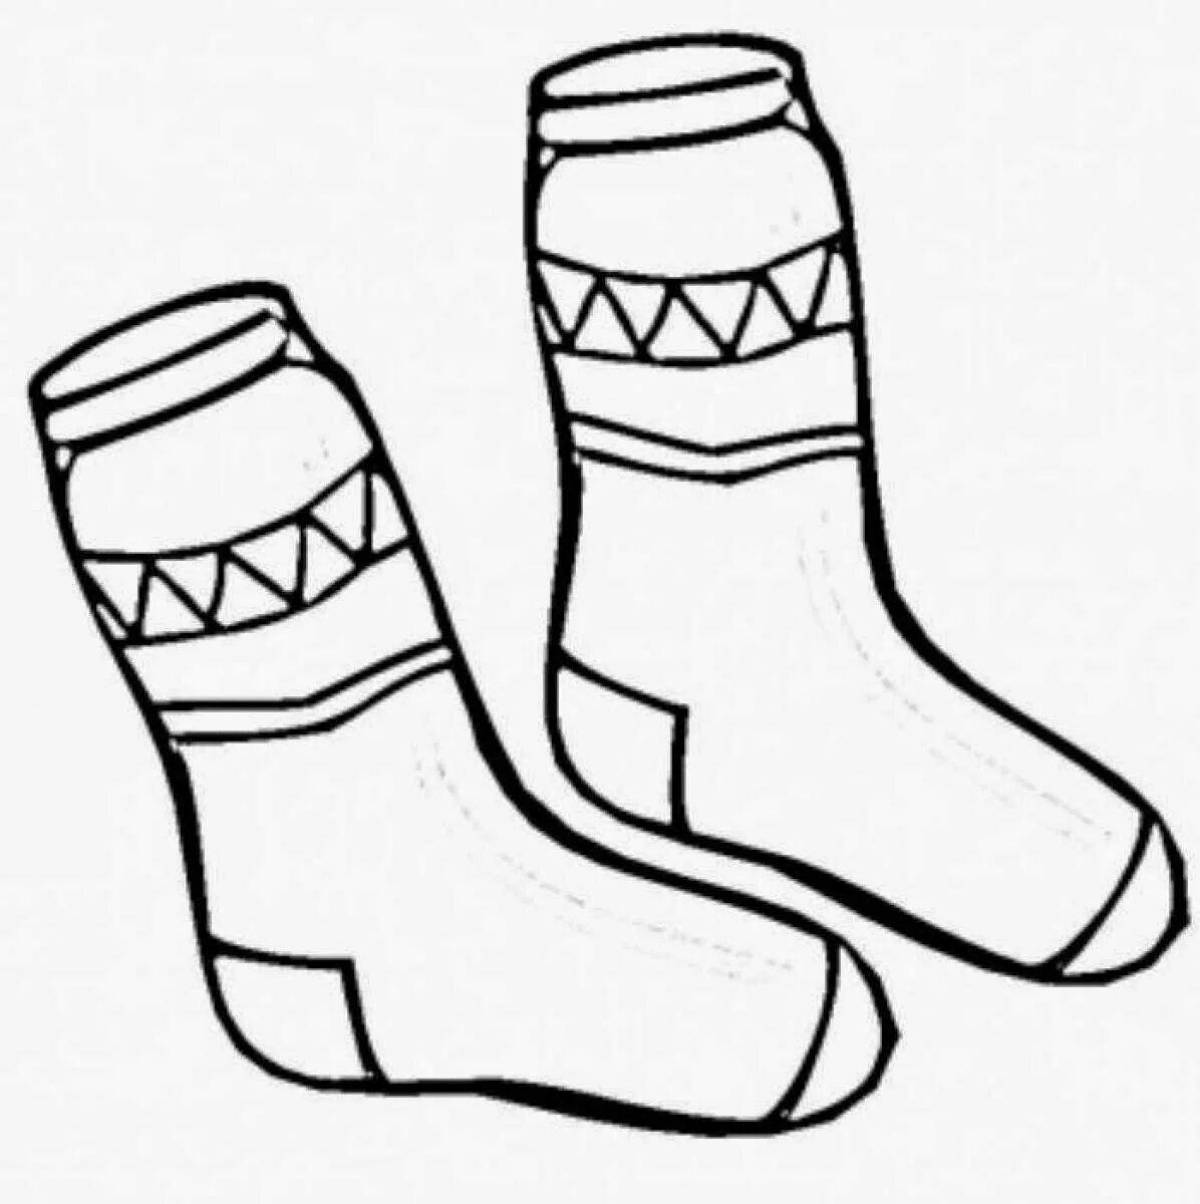 Coloring-colored-fancy-coloring-socks for children